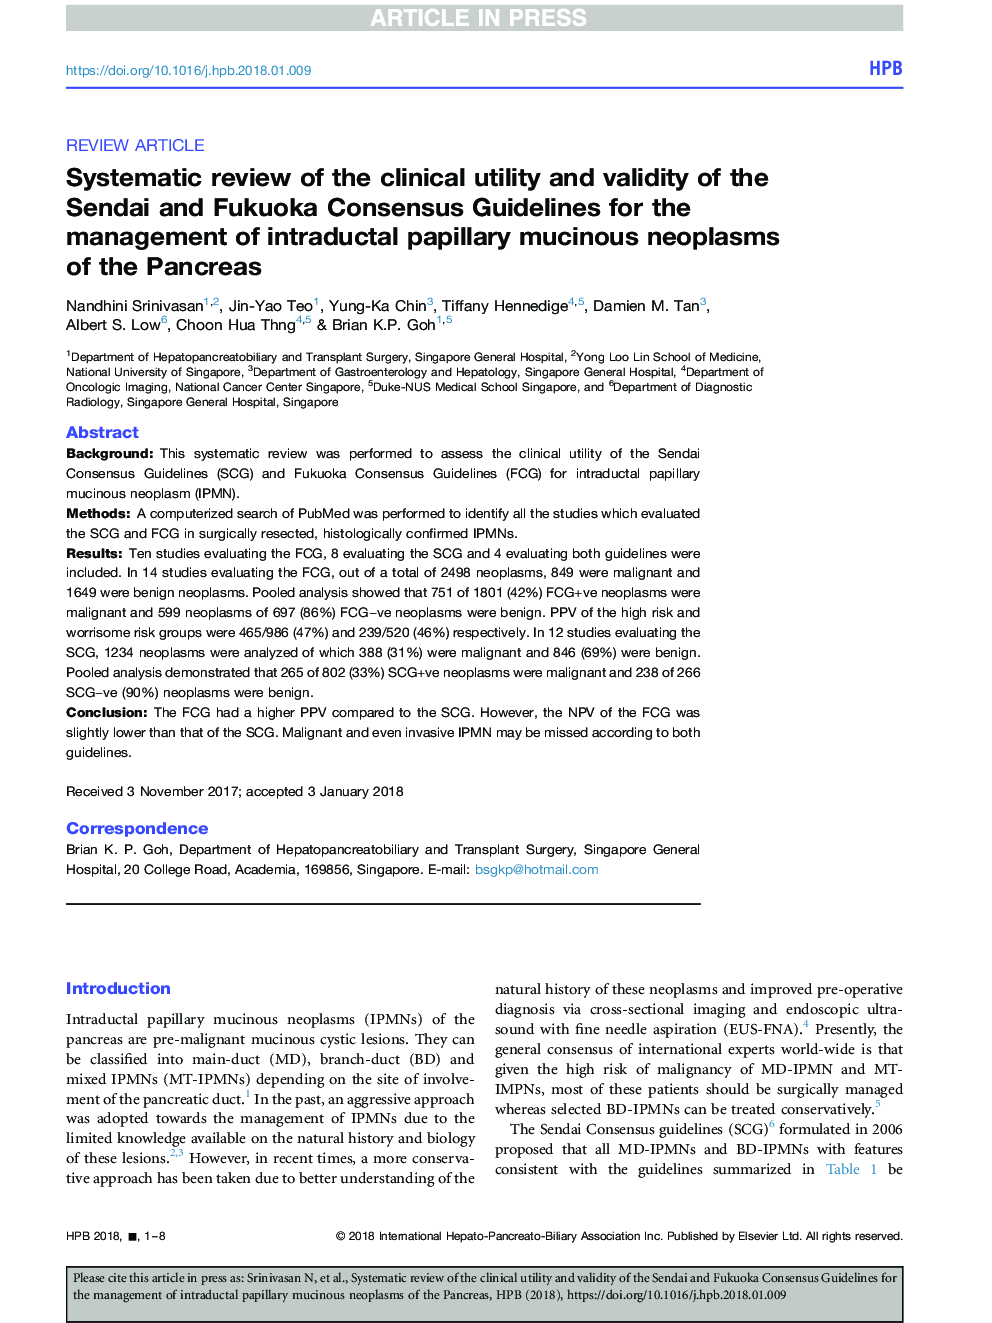 Systematic review of the clinical utility and validity of the Sendai and Fukuoka Consensus Guidelines for the management of intraductal papillary mucinous neoplasms of the pancreas